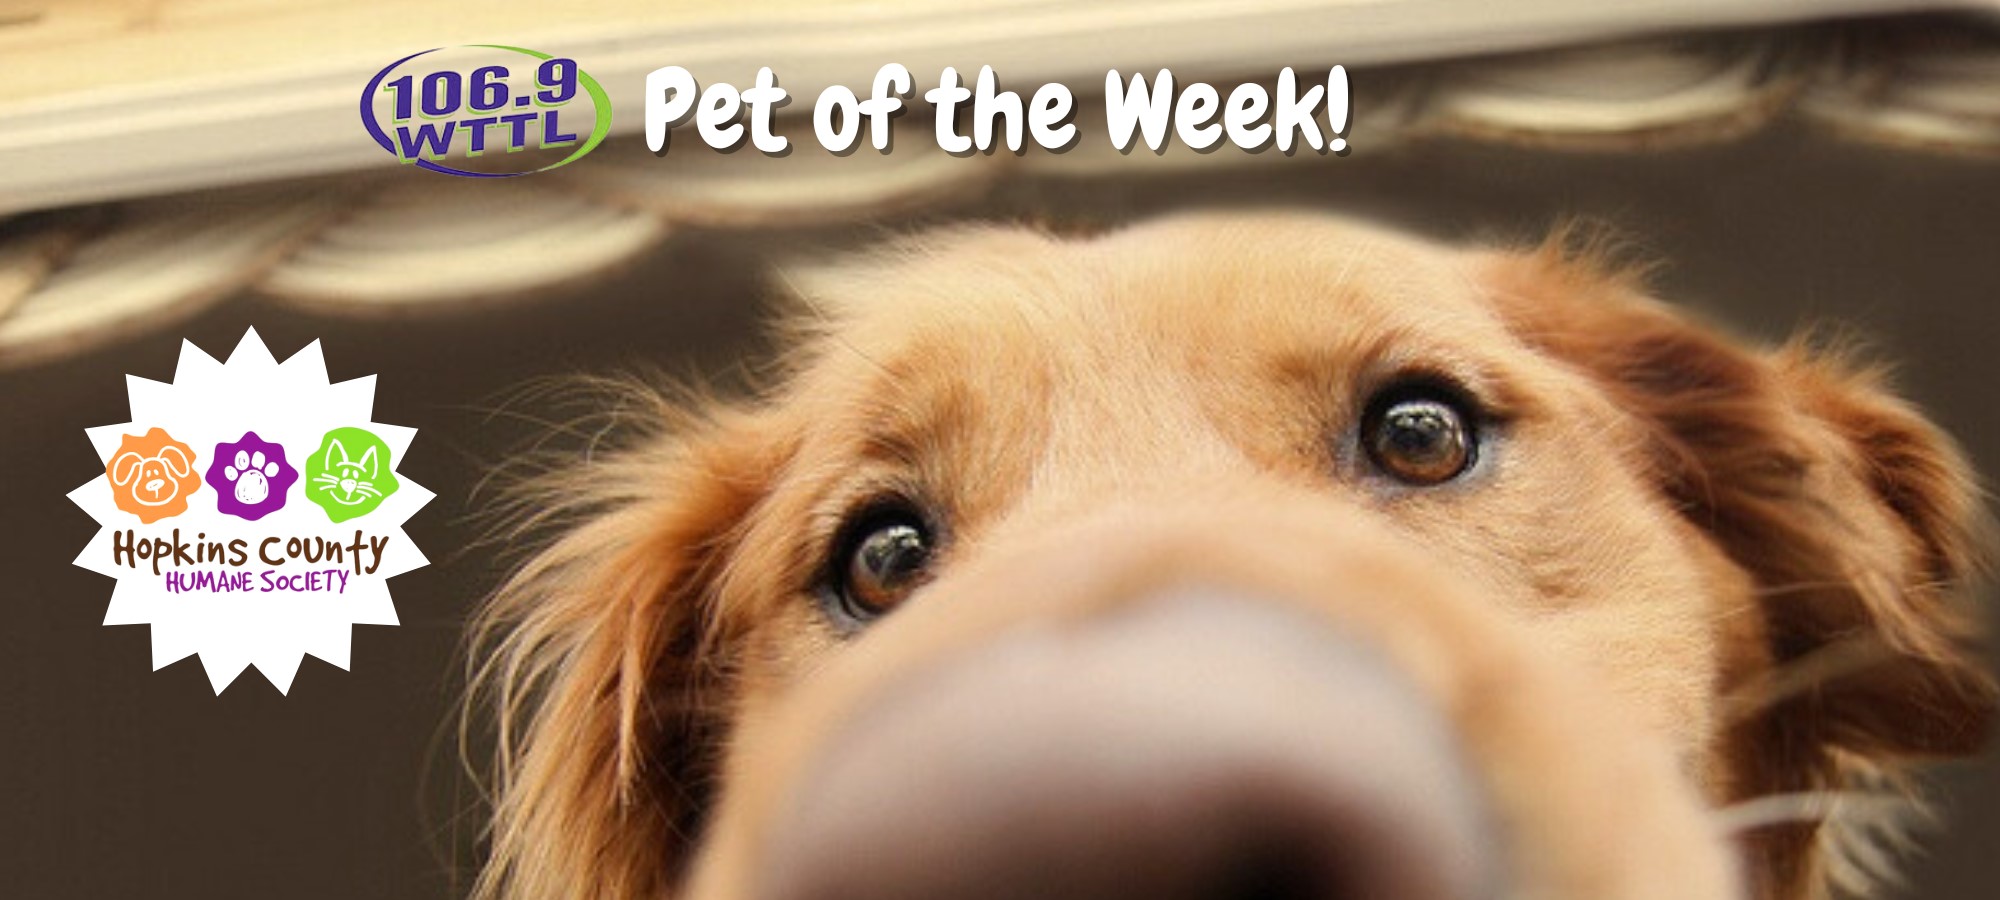 Hopkins County Humane Society’s Pet of the Week Monday, July 1